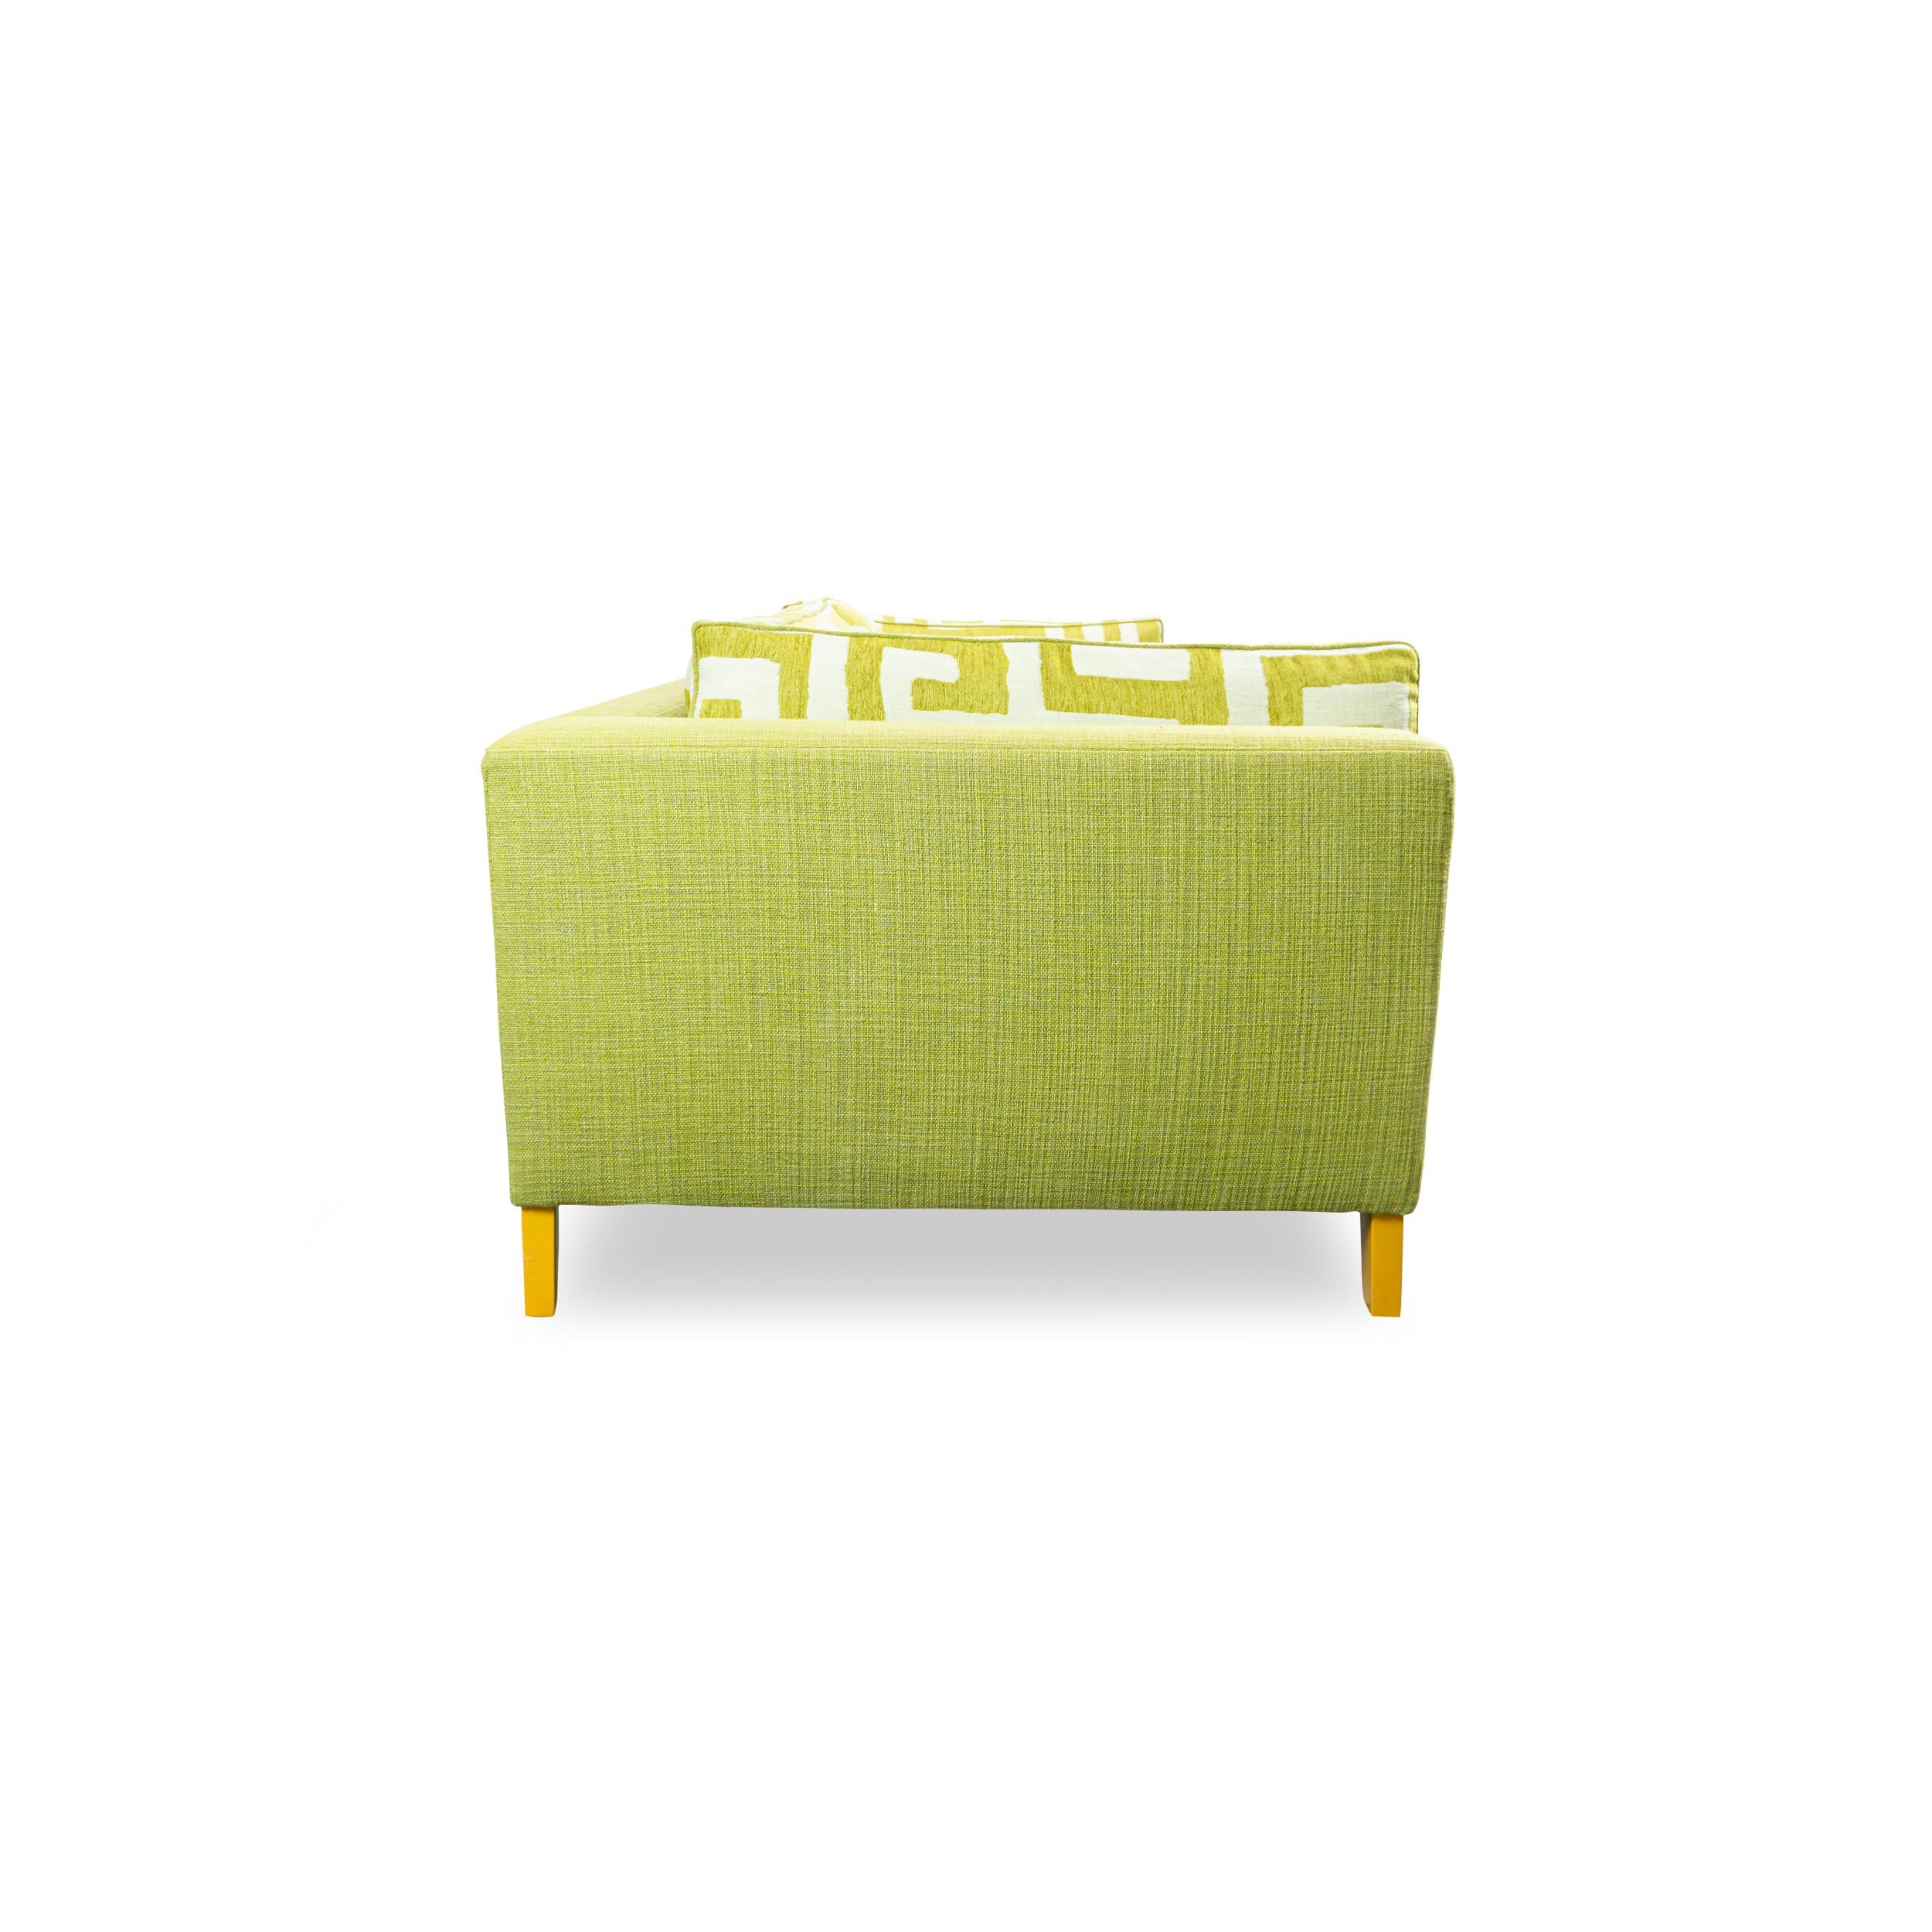 American Lime Green Bench Cushion Sofa with Maze Pattern Cushions and Sunflower Feet For Sale